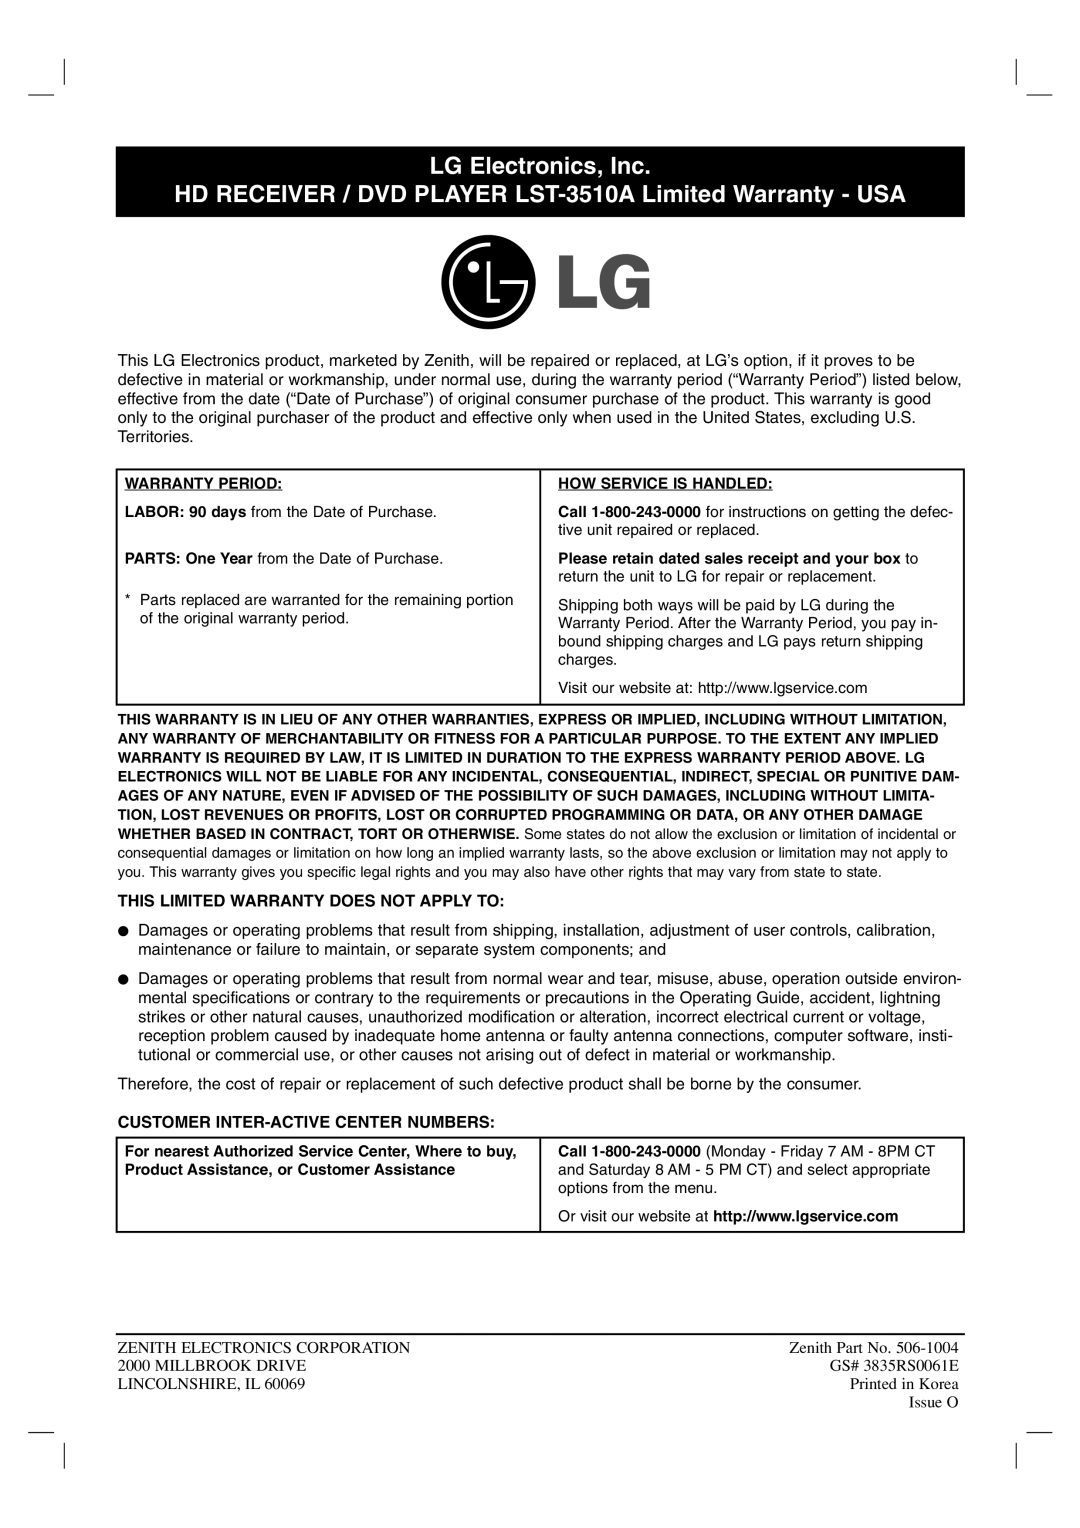 LG Electronics owner manual LG Electronics, Inc, HD RECEIVER / DVD PLAYER LST-3510A Limited Warranty - USA 